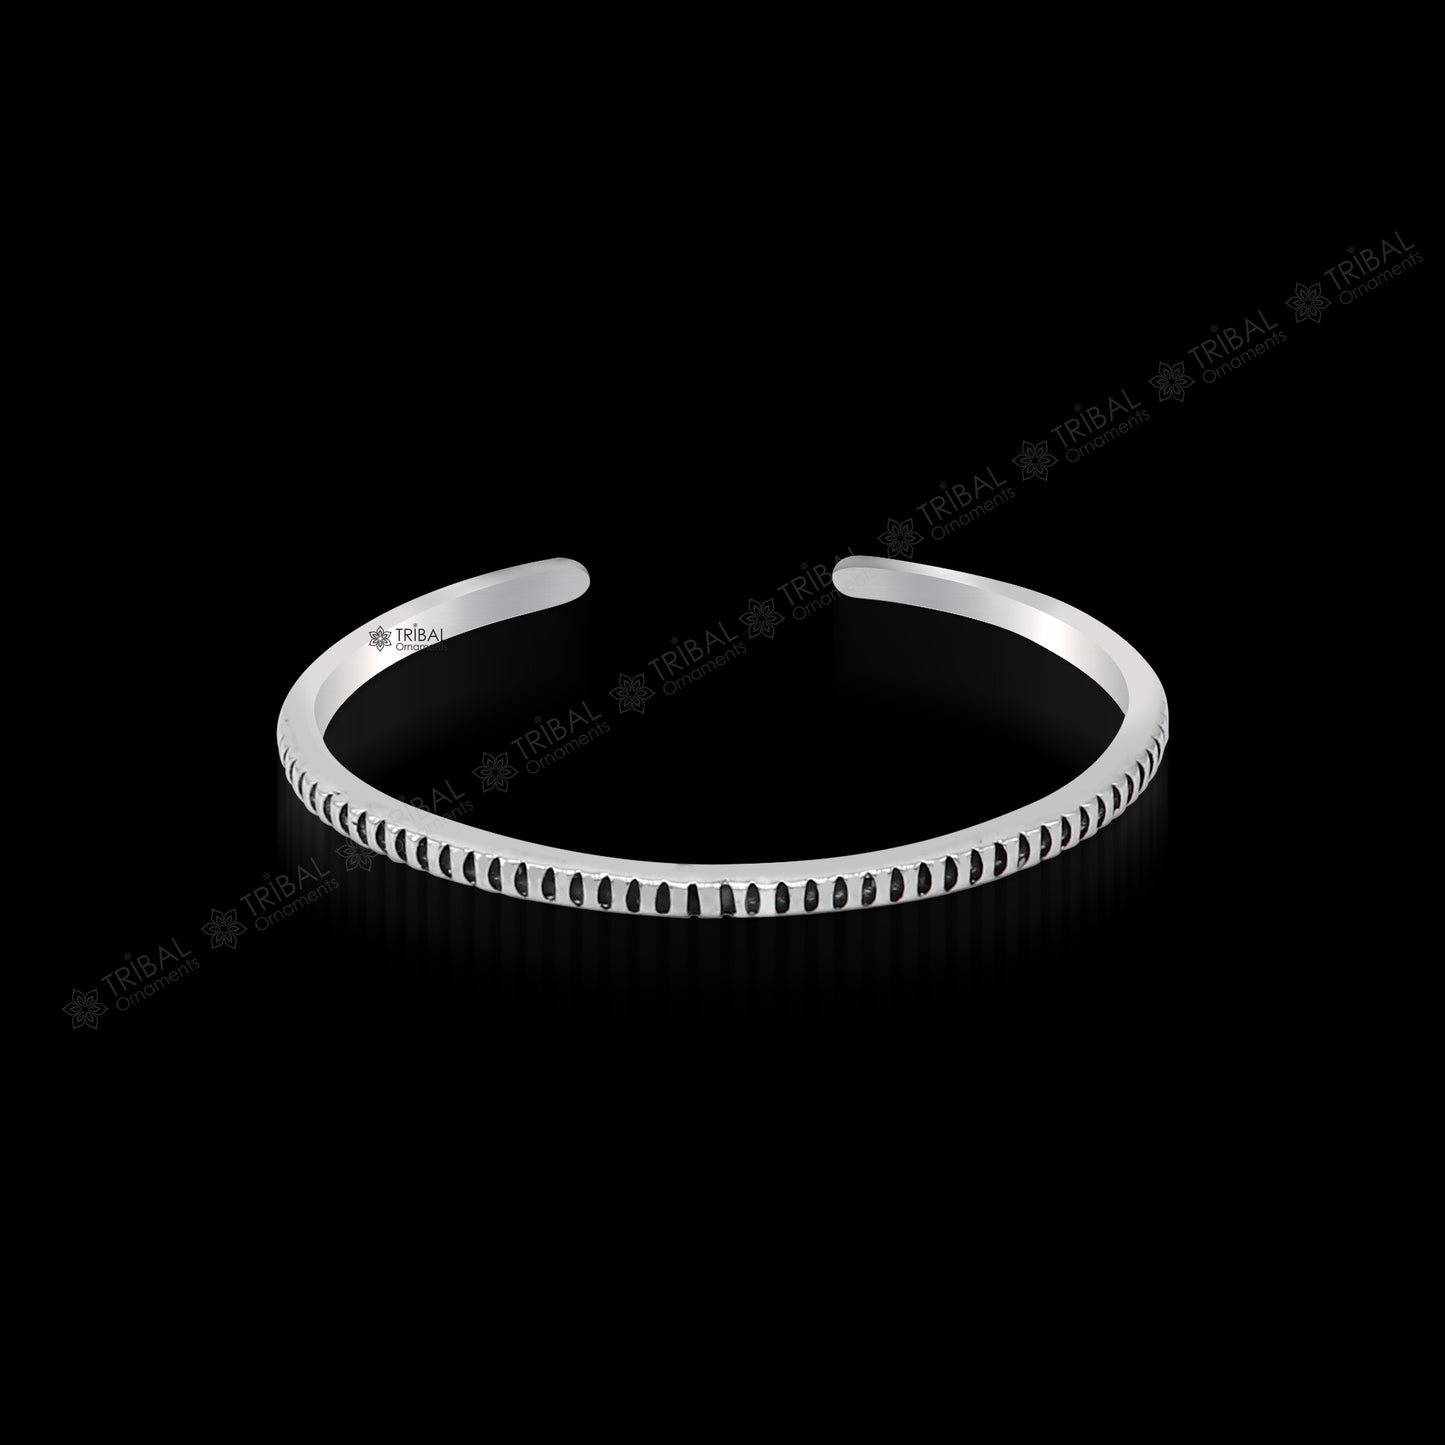 solid 925 sterling silver handmade adjustable cuff bangle bracelet unsex gifting jewelry, best gift cuff bracelet from india nsk375